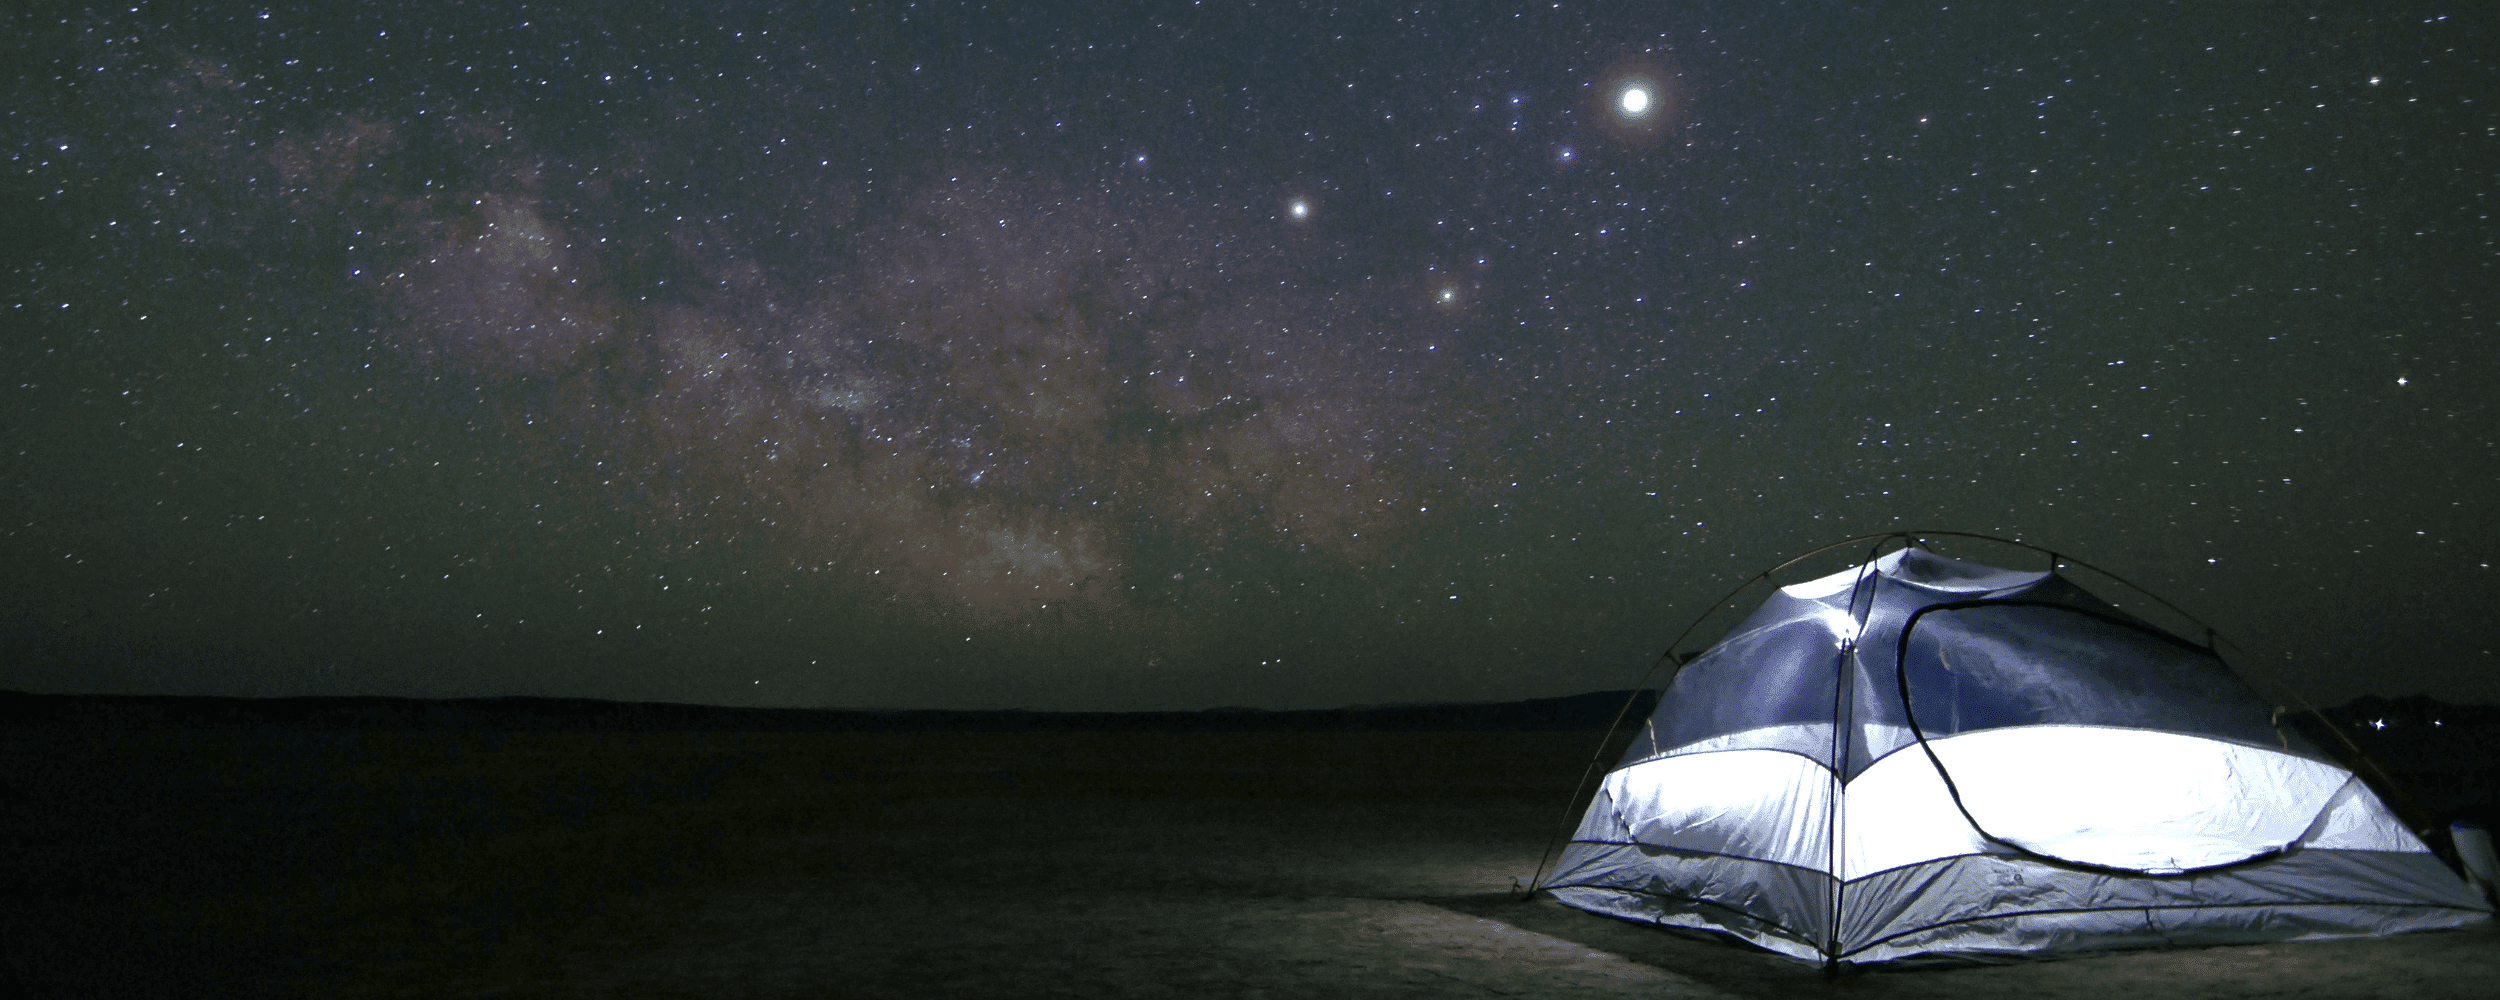 the starry sky and a camping tent by the beach